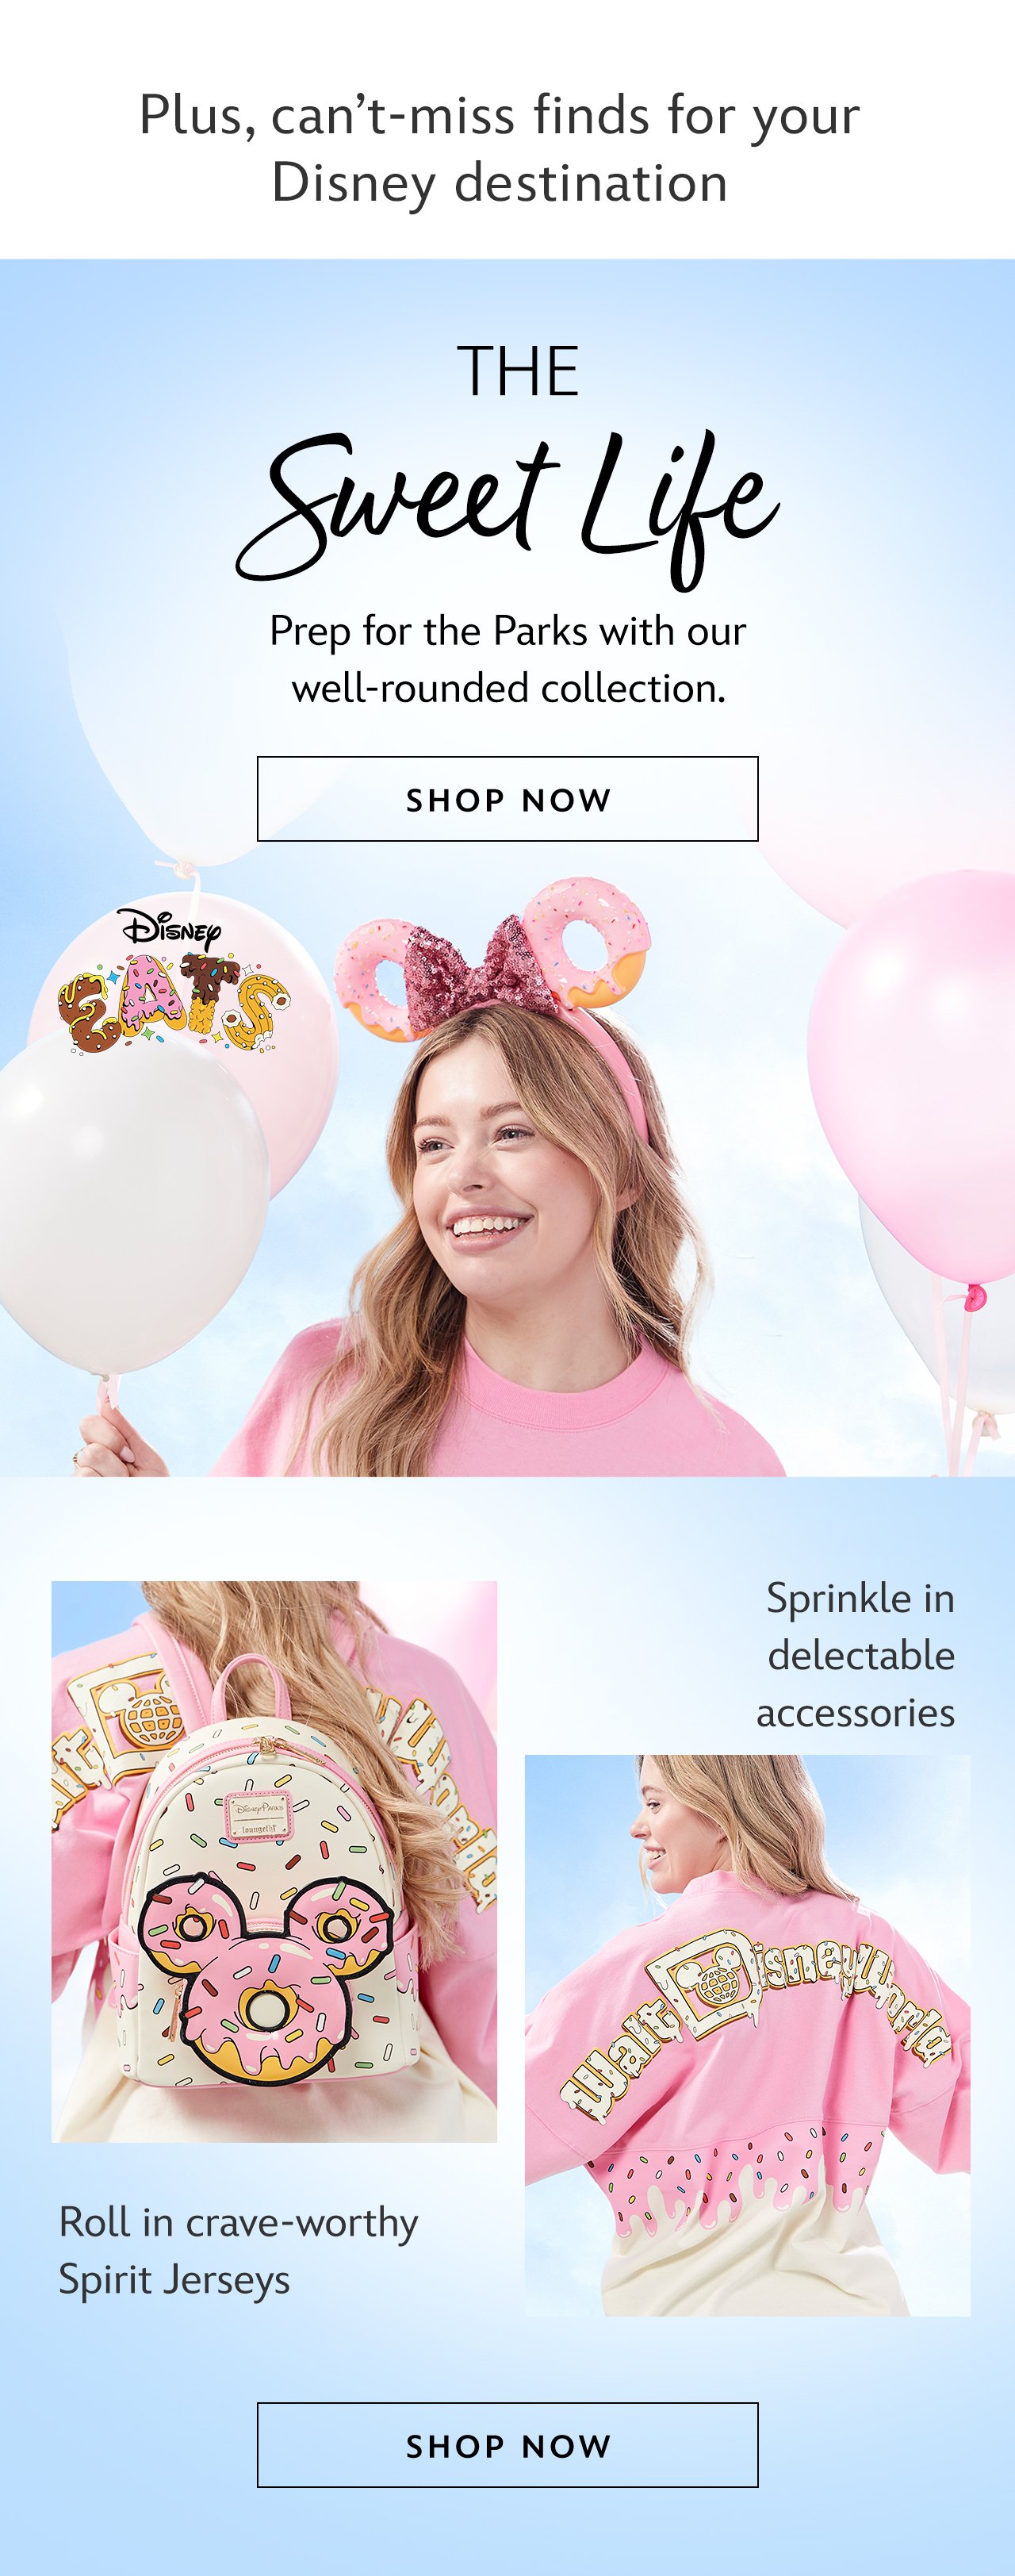 Plus, can\x92t-miss finds for your Disney destination.The Sweet Life. Prep for the Parks with our well-rounded collection.|Shop Now Sprinkle in delectable accessories. Roll in crave-worthy Spirit Jerseys.|Shop Now